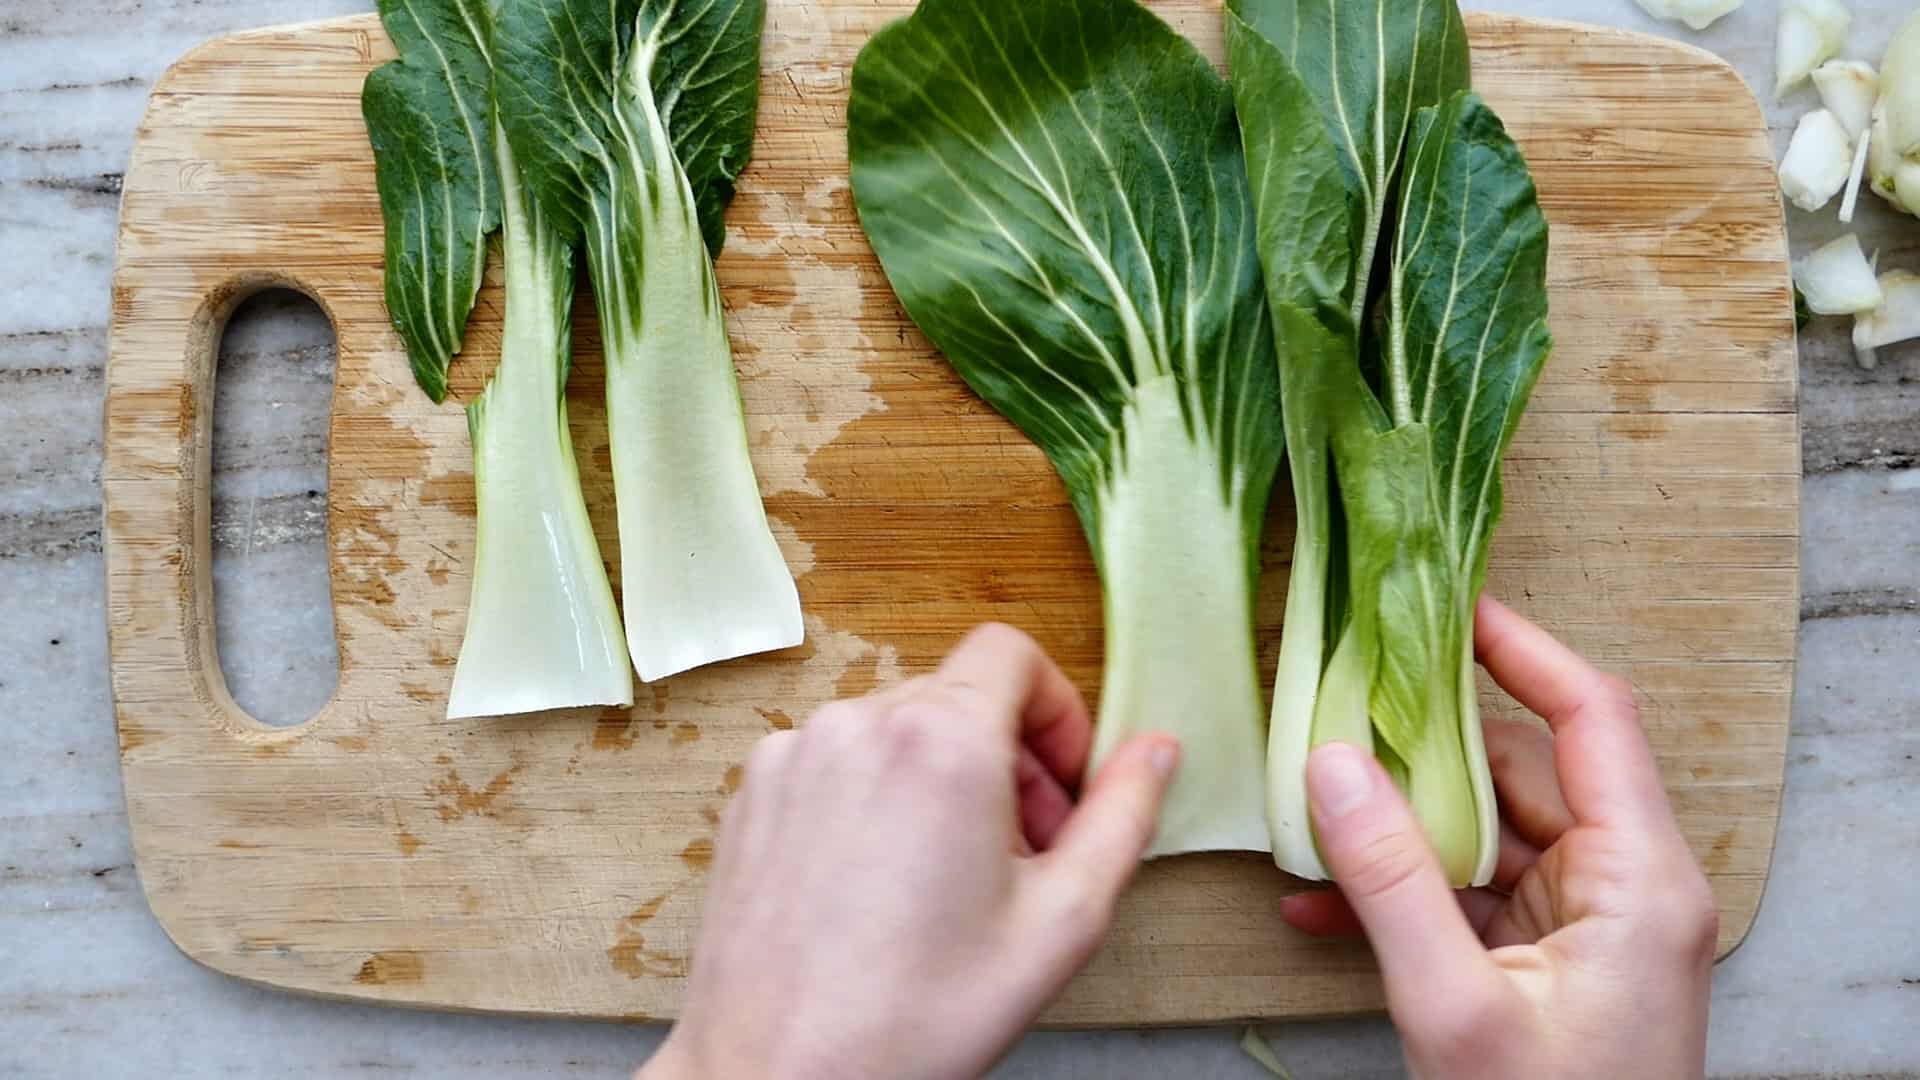 Woman pulling leaves from a head of a broccoli plant on a cutting board